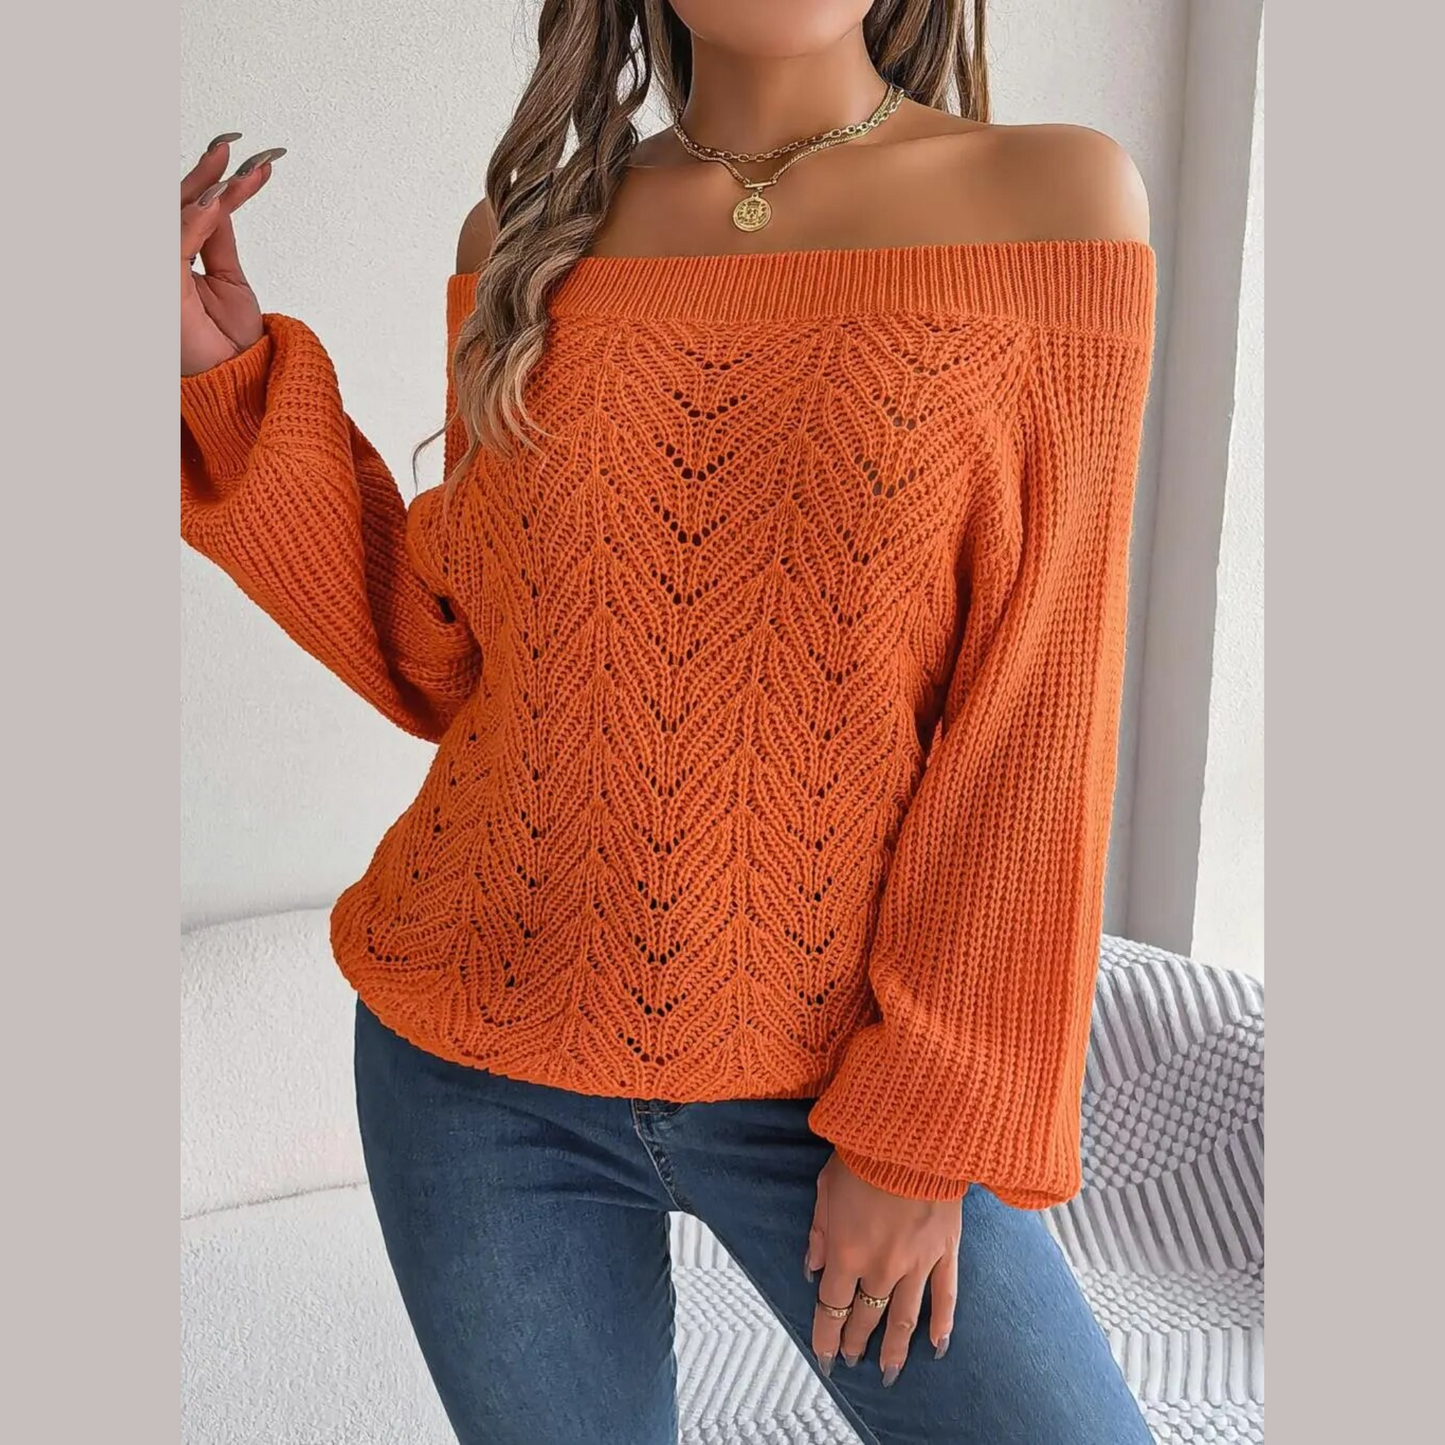 Loni - Orange Knitted Off The Shoulder Sweater Top